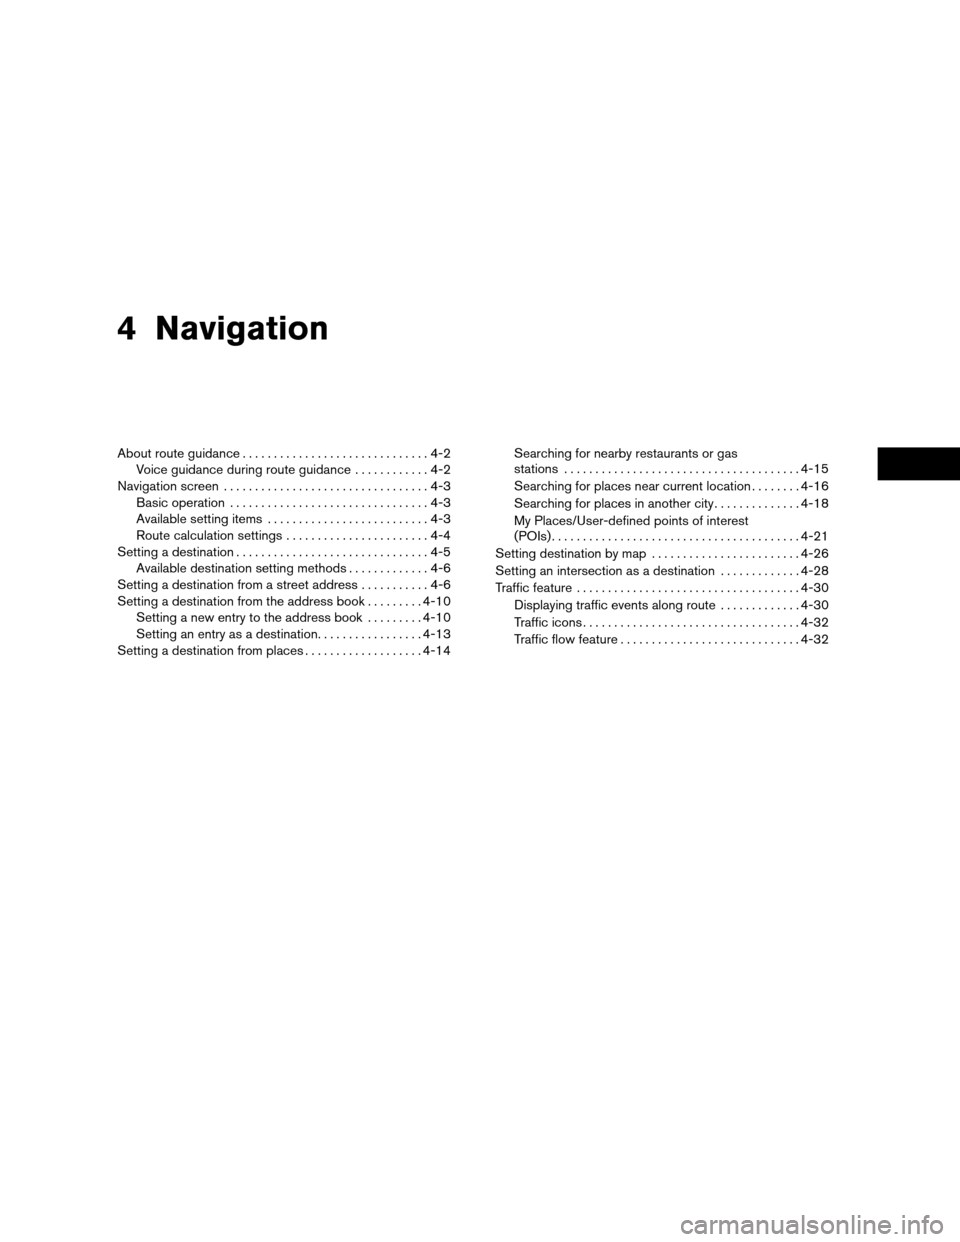 NISSAN ROGUE 2011 1.G LC Navigation Manual 4 Navigation
About route guidance..............................4-2
Voice guidance during route guidance ............4-2
Navigation screen .................................4-3
Basic operation .........